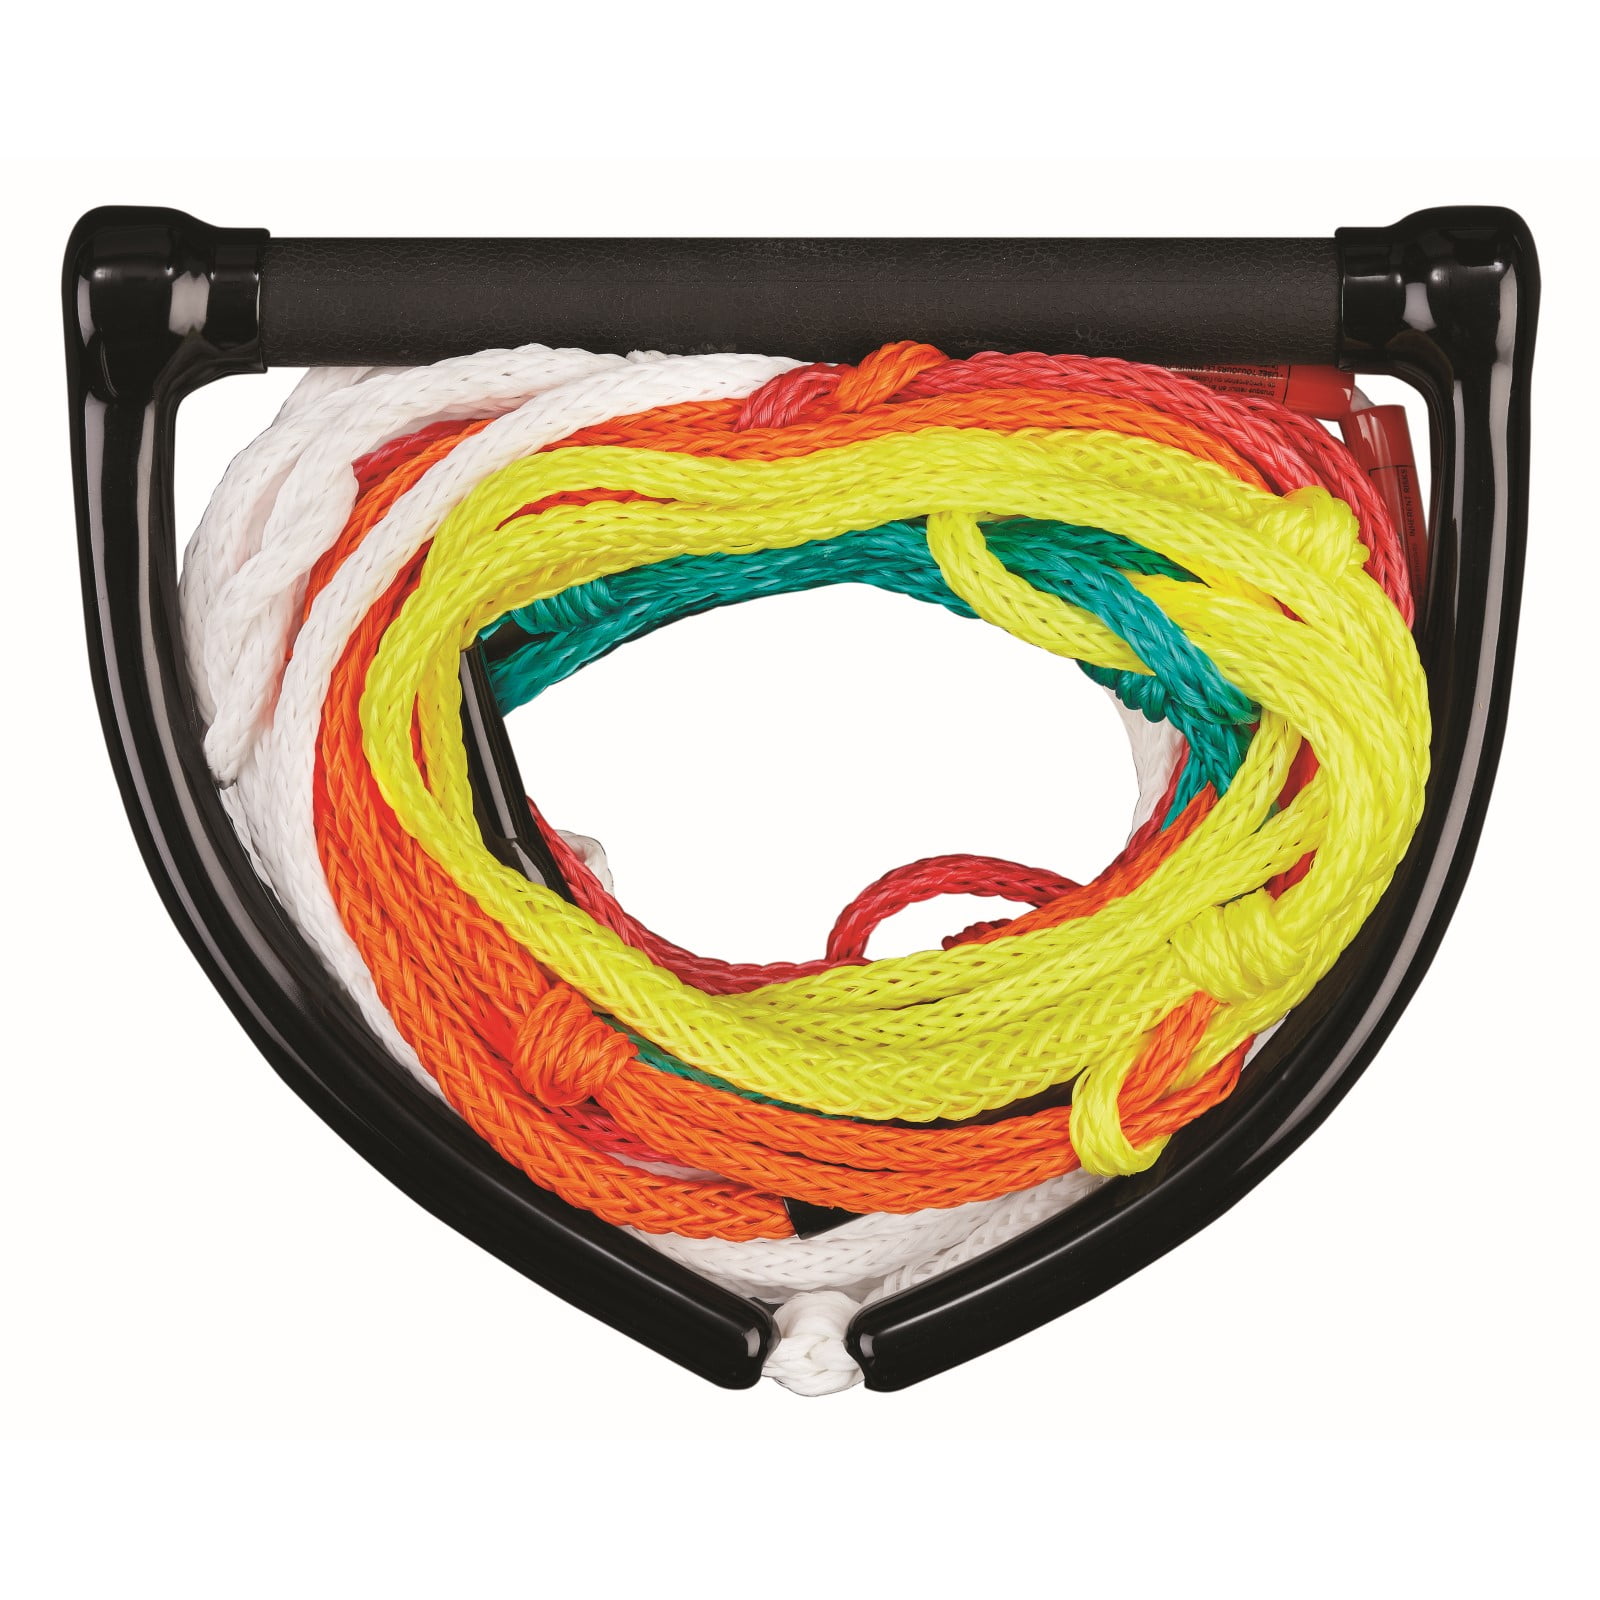 6100lbs57-1542 Airhead SPORTSSTUFF Towable Tube 6-Person 60-foot Tow Rope 